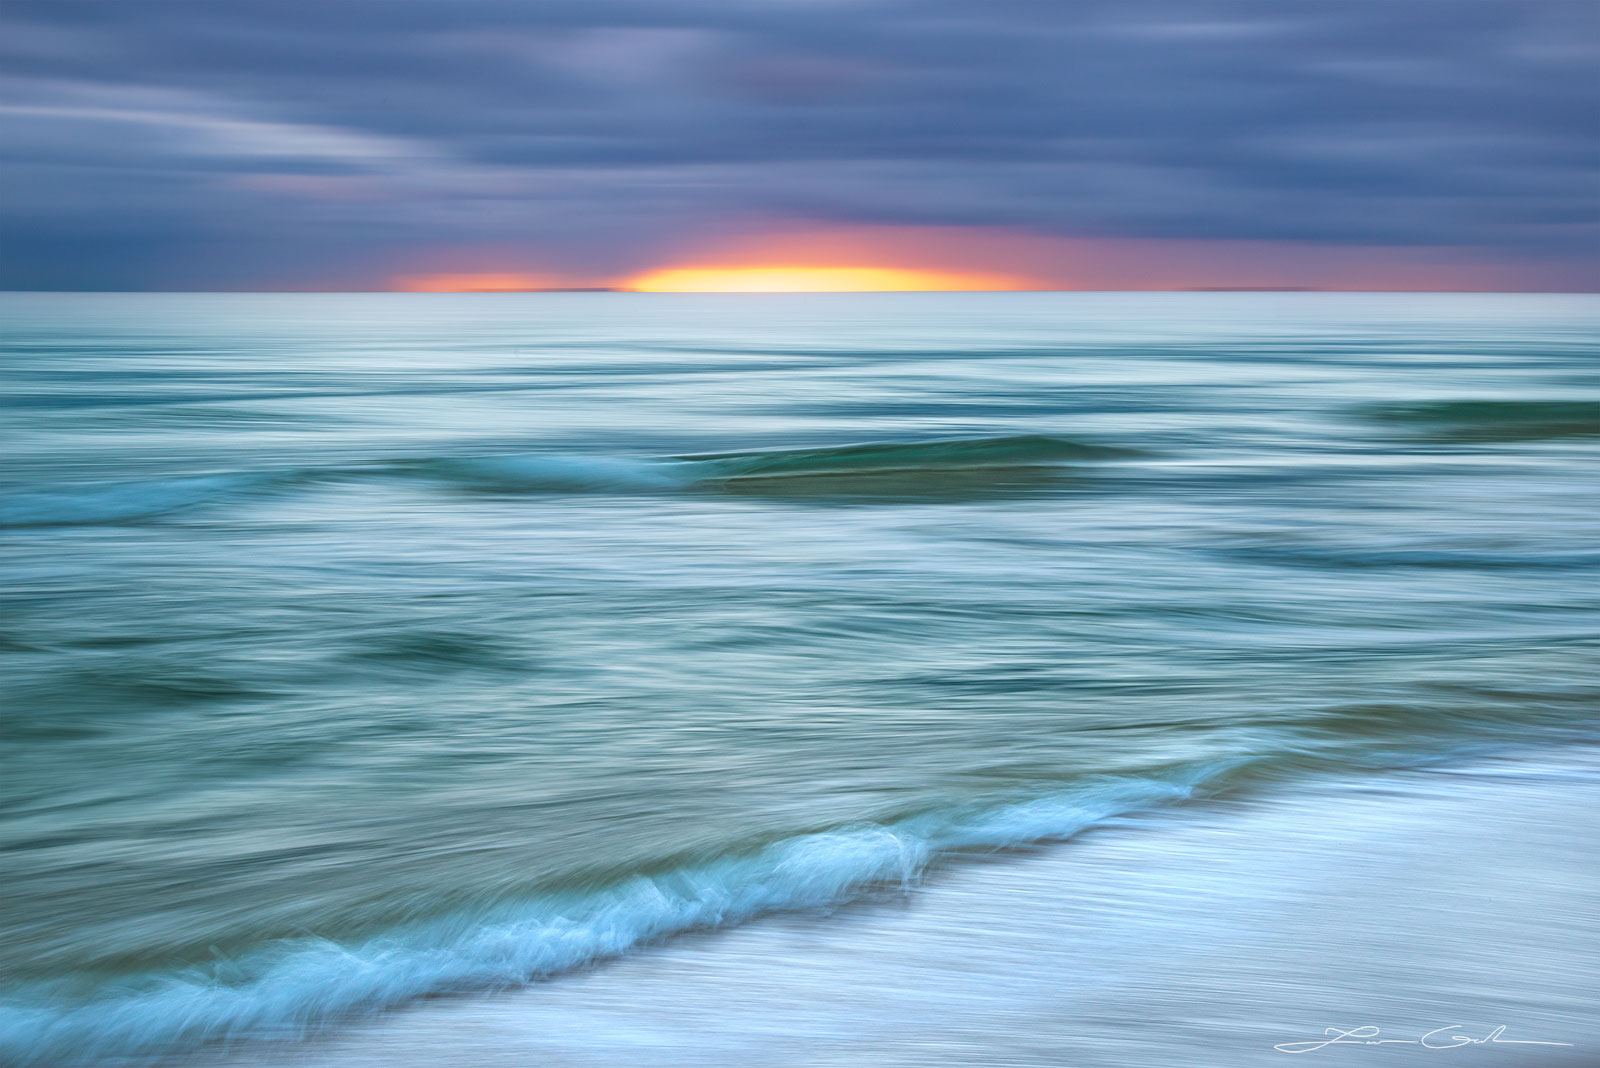 A glassy looking ocean shore with some waves and a sunrise on the horizon - abstract photo - Gintchin Fine Art